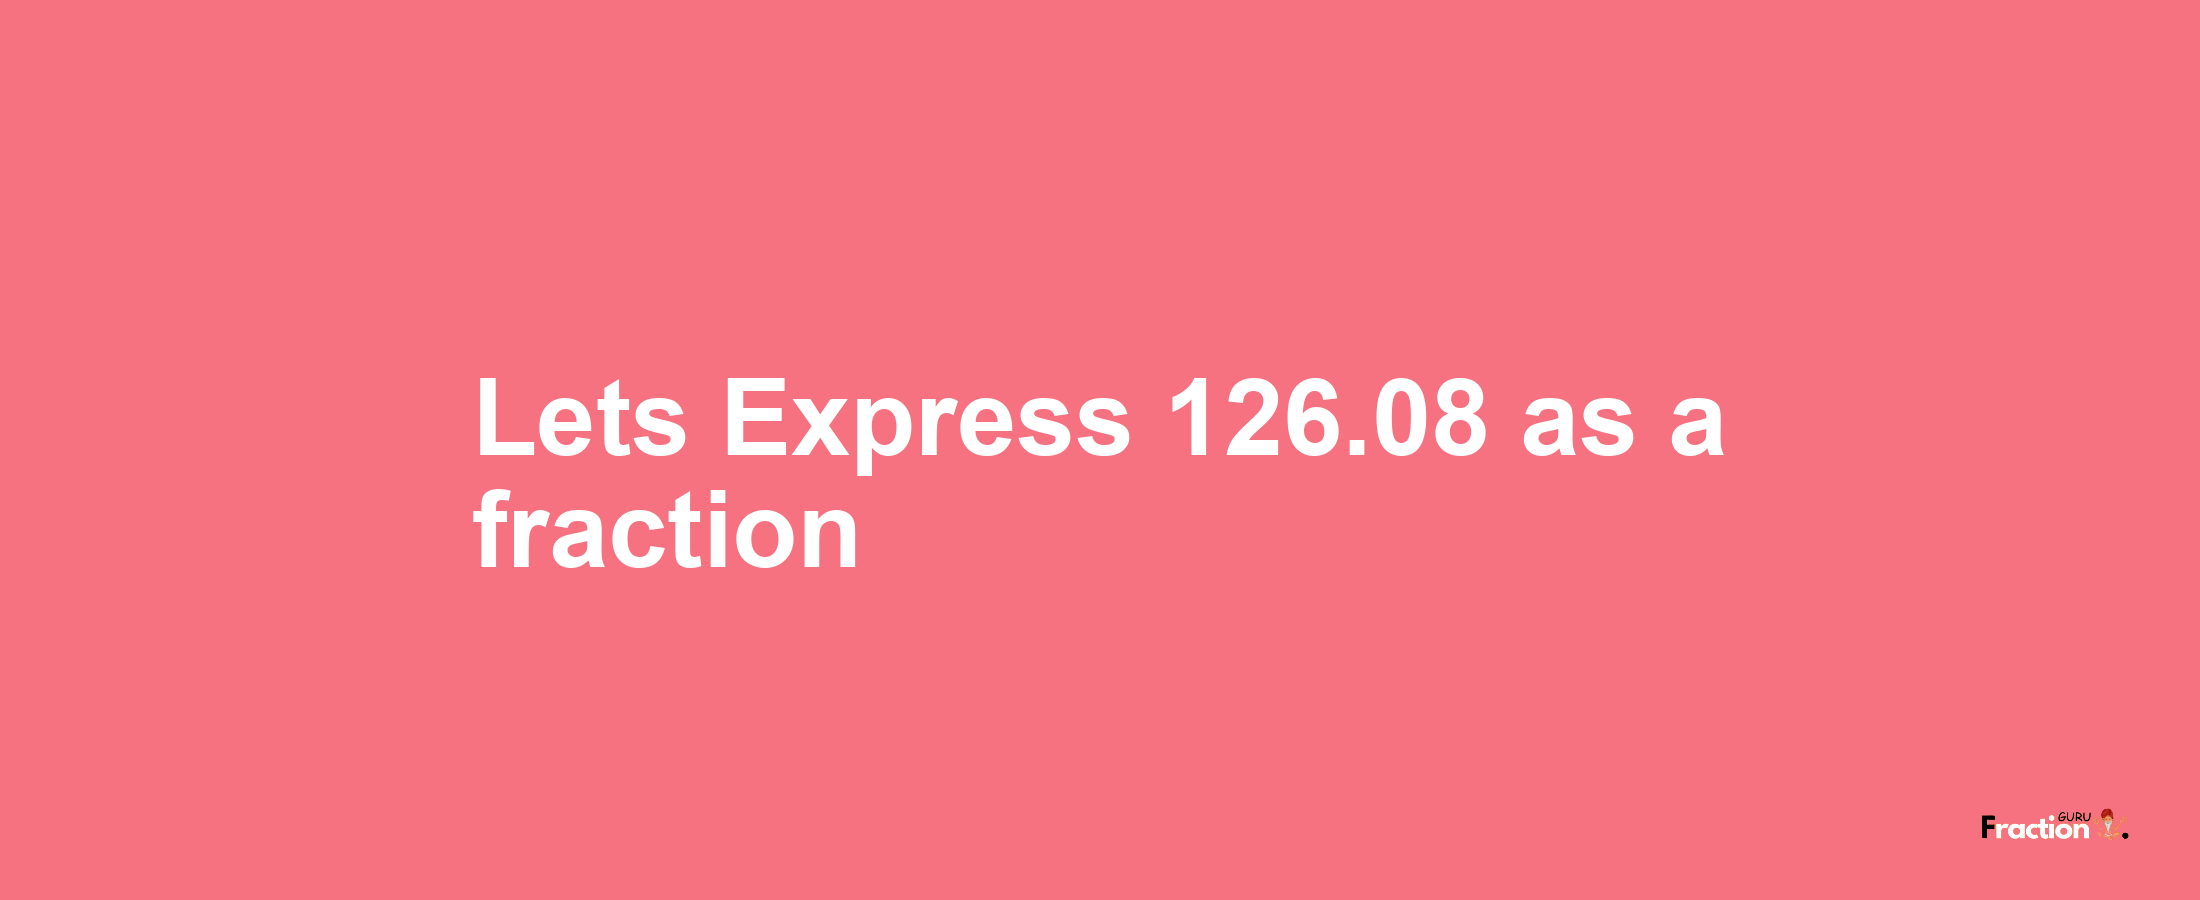 Lets Express 126.08 as afraction